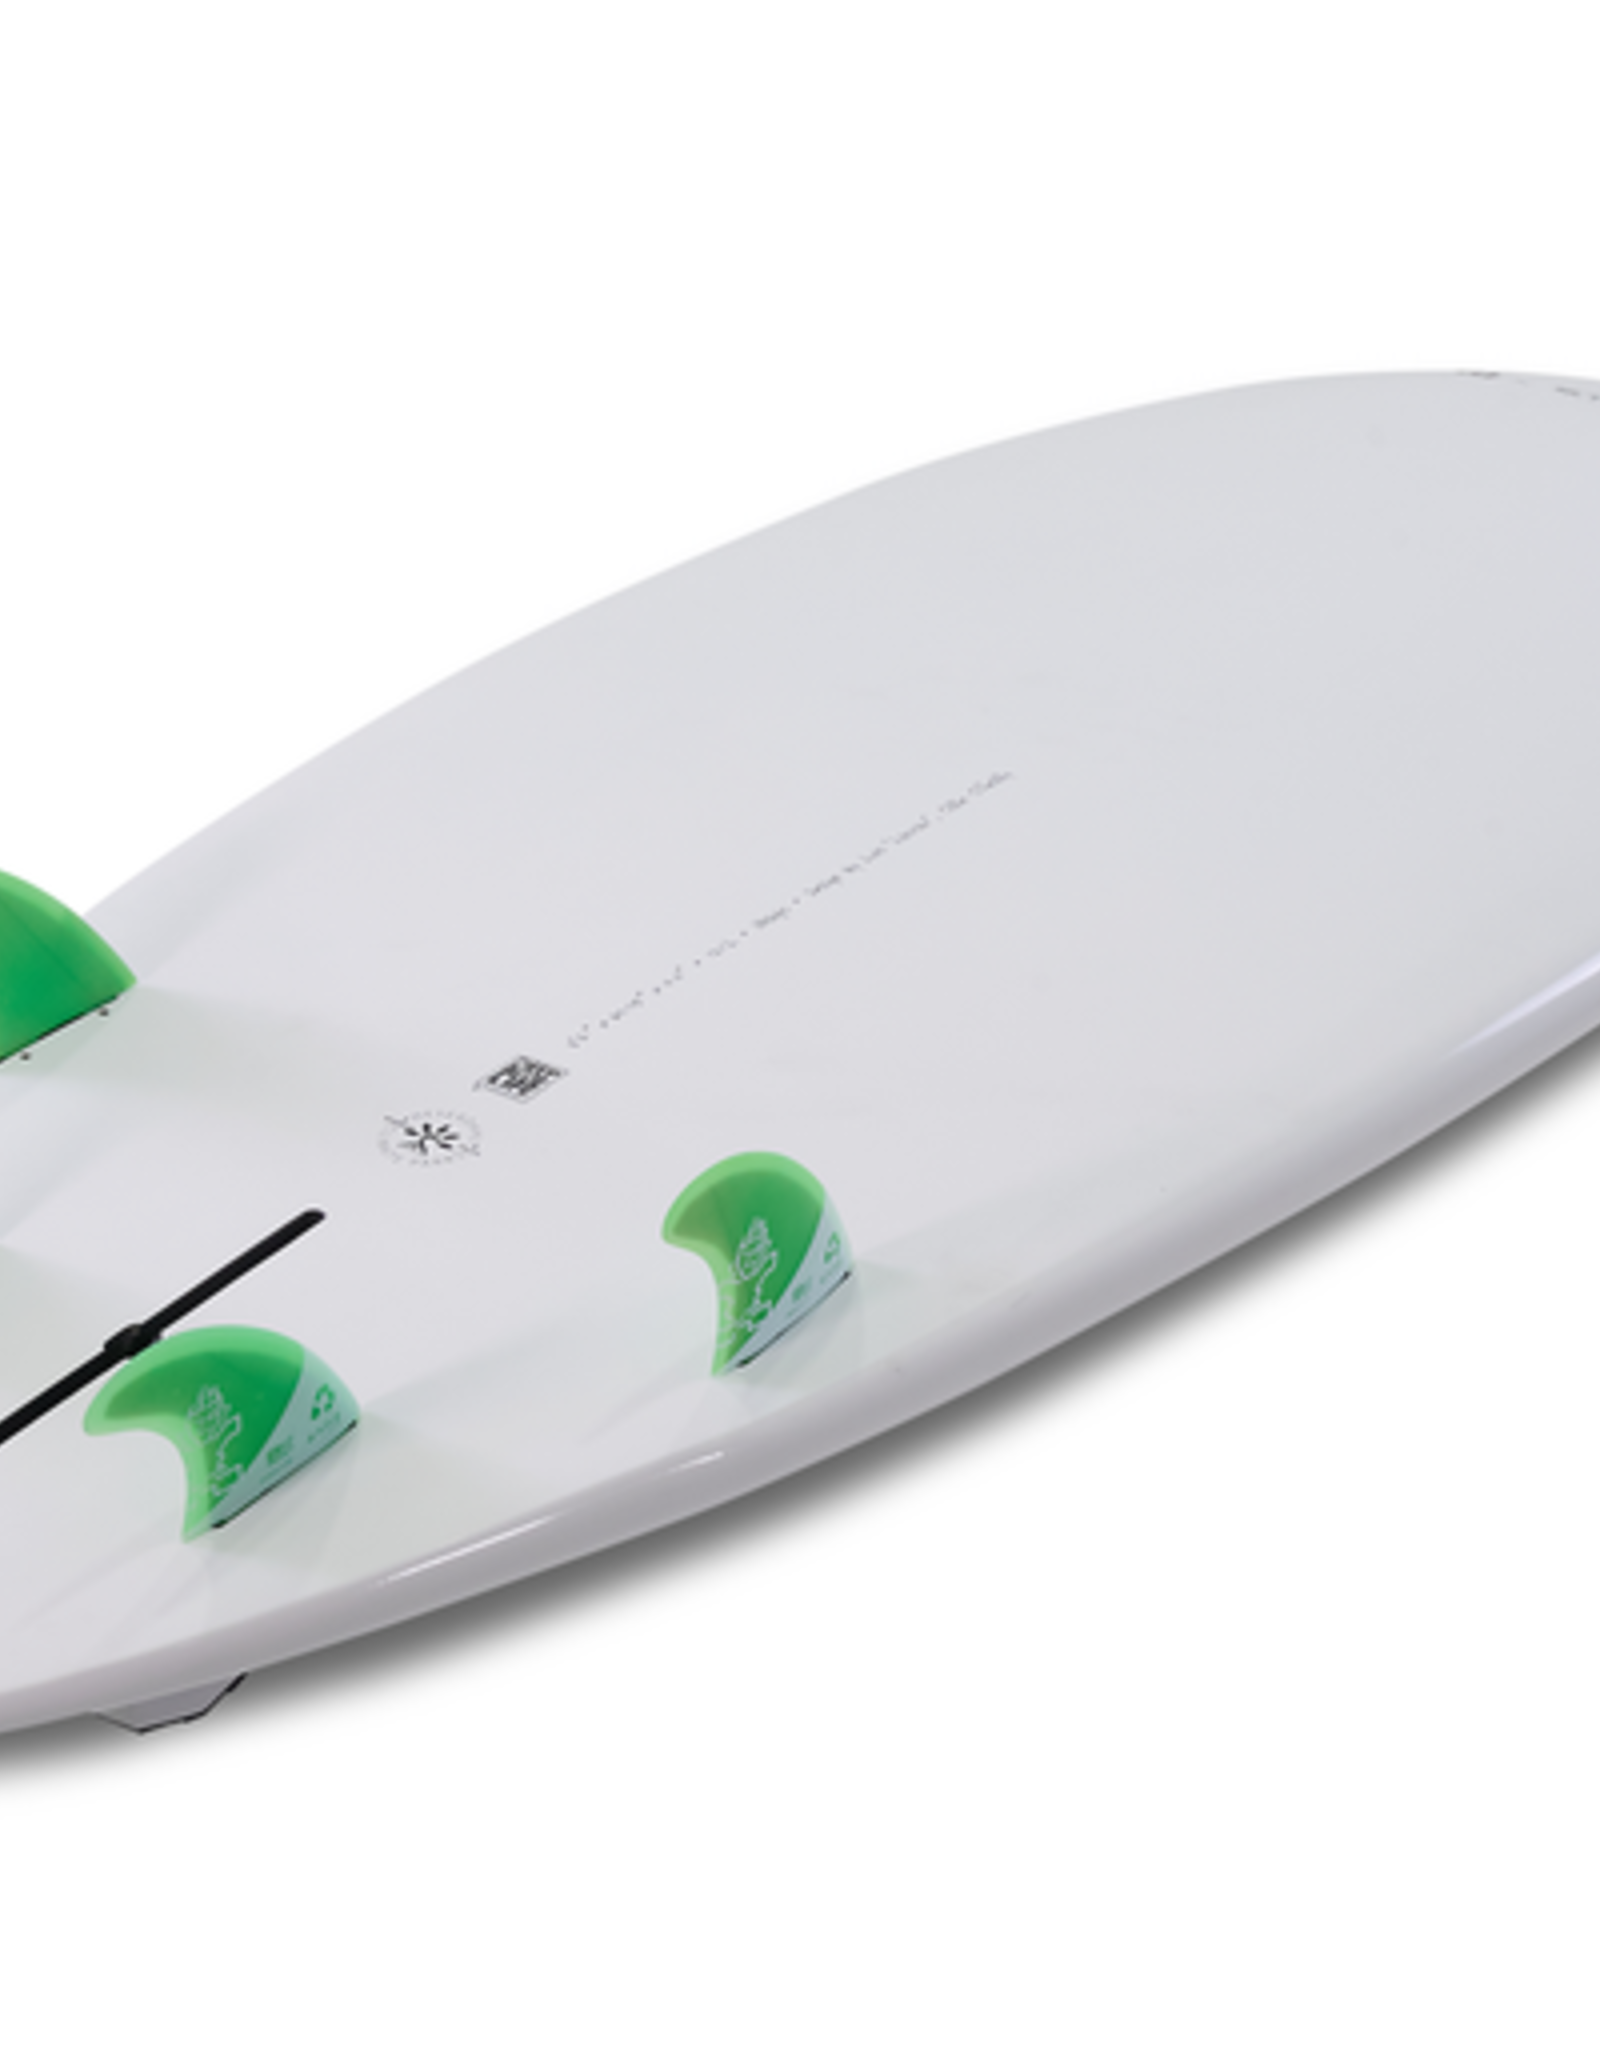 Starboard 2024 STARBOARD SPICE 8'2 x 30.75 LIMITED SERIES